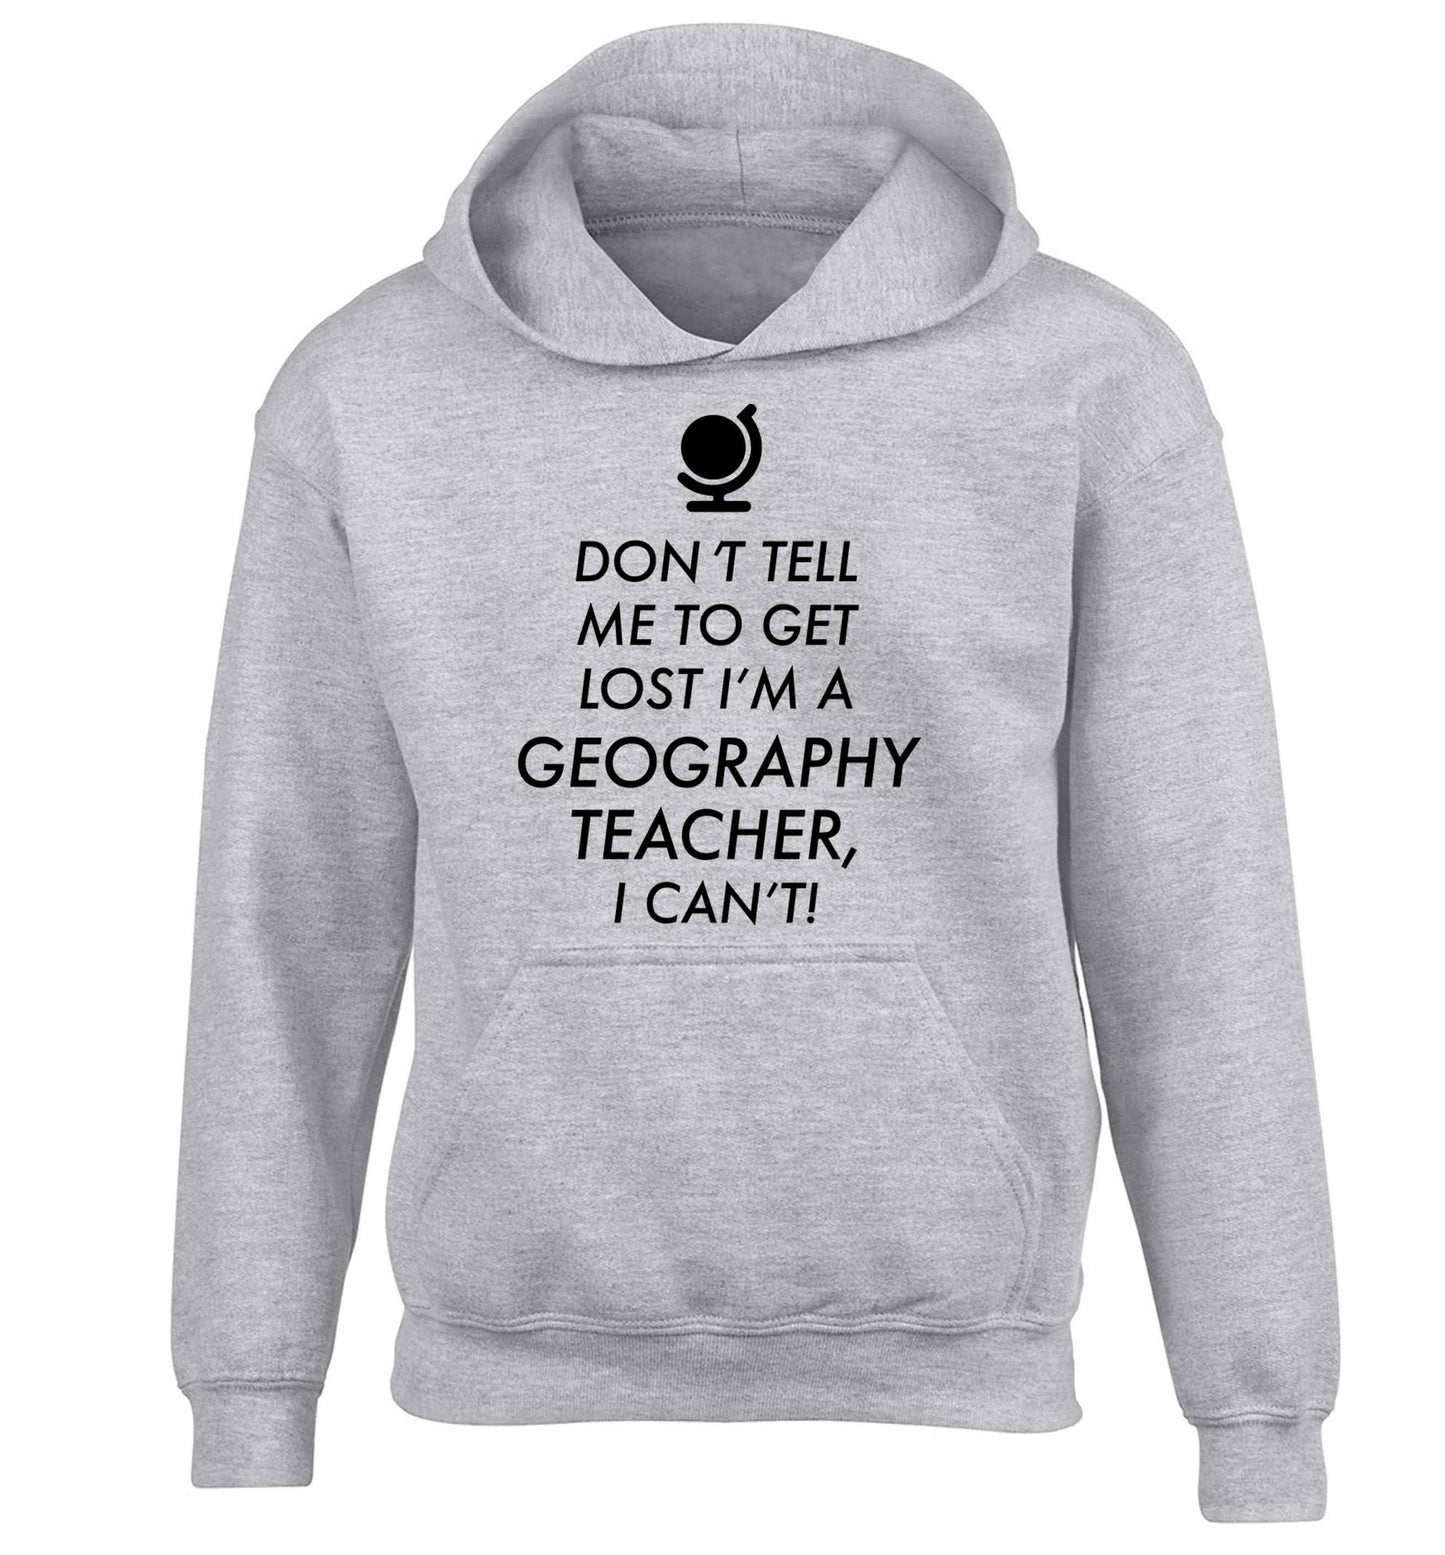 Don't tell me to get lost I'm a geography teacher, I can't children's grey hoodie 12-13 Years